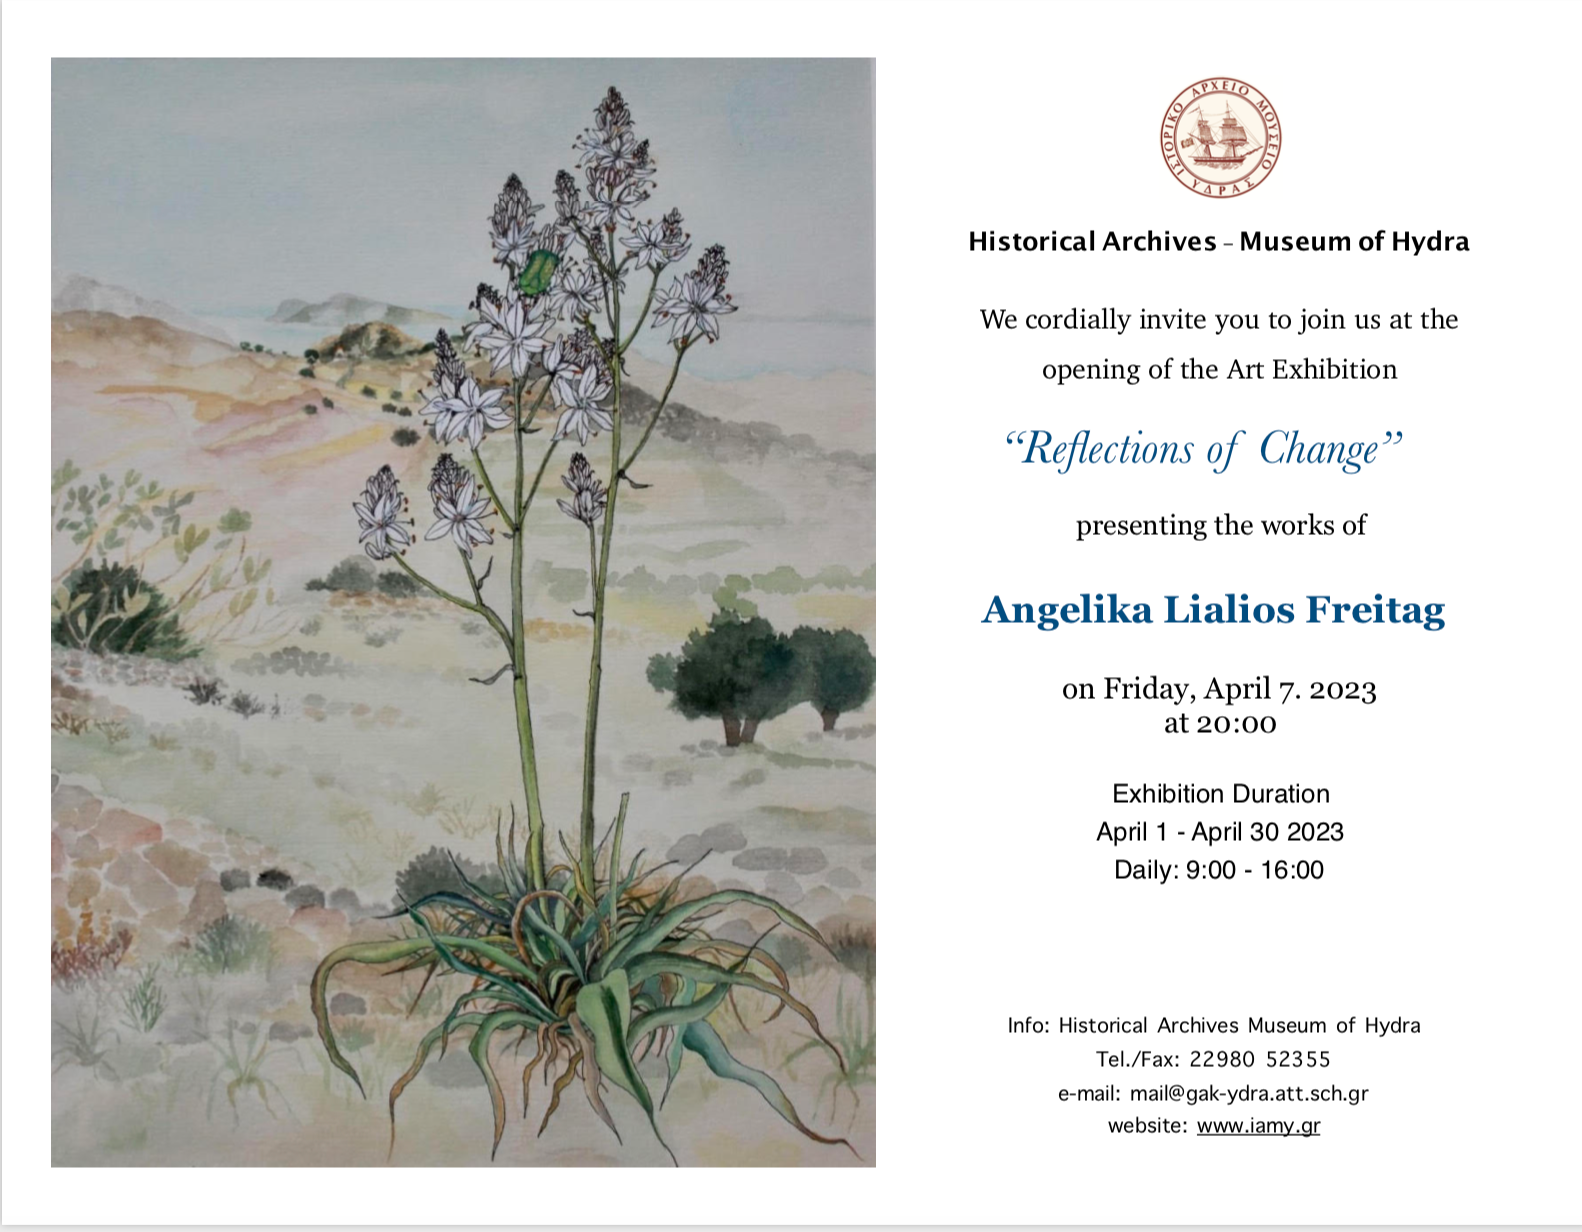 Invitation to art exhibition opening of Angelika Lialios Freitag at the Museum of Hydra Island Greece